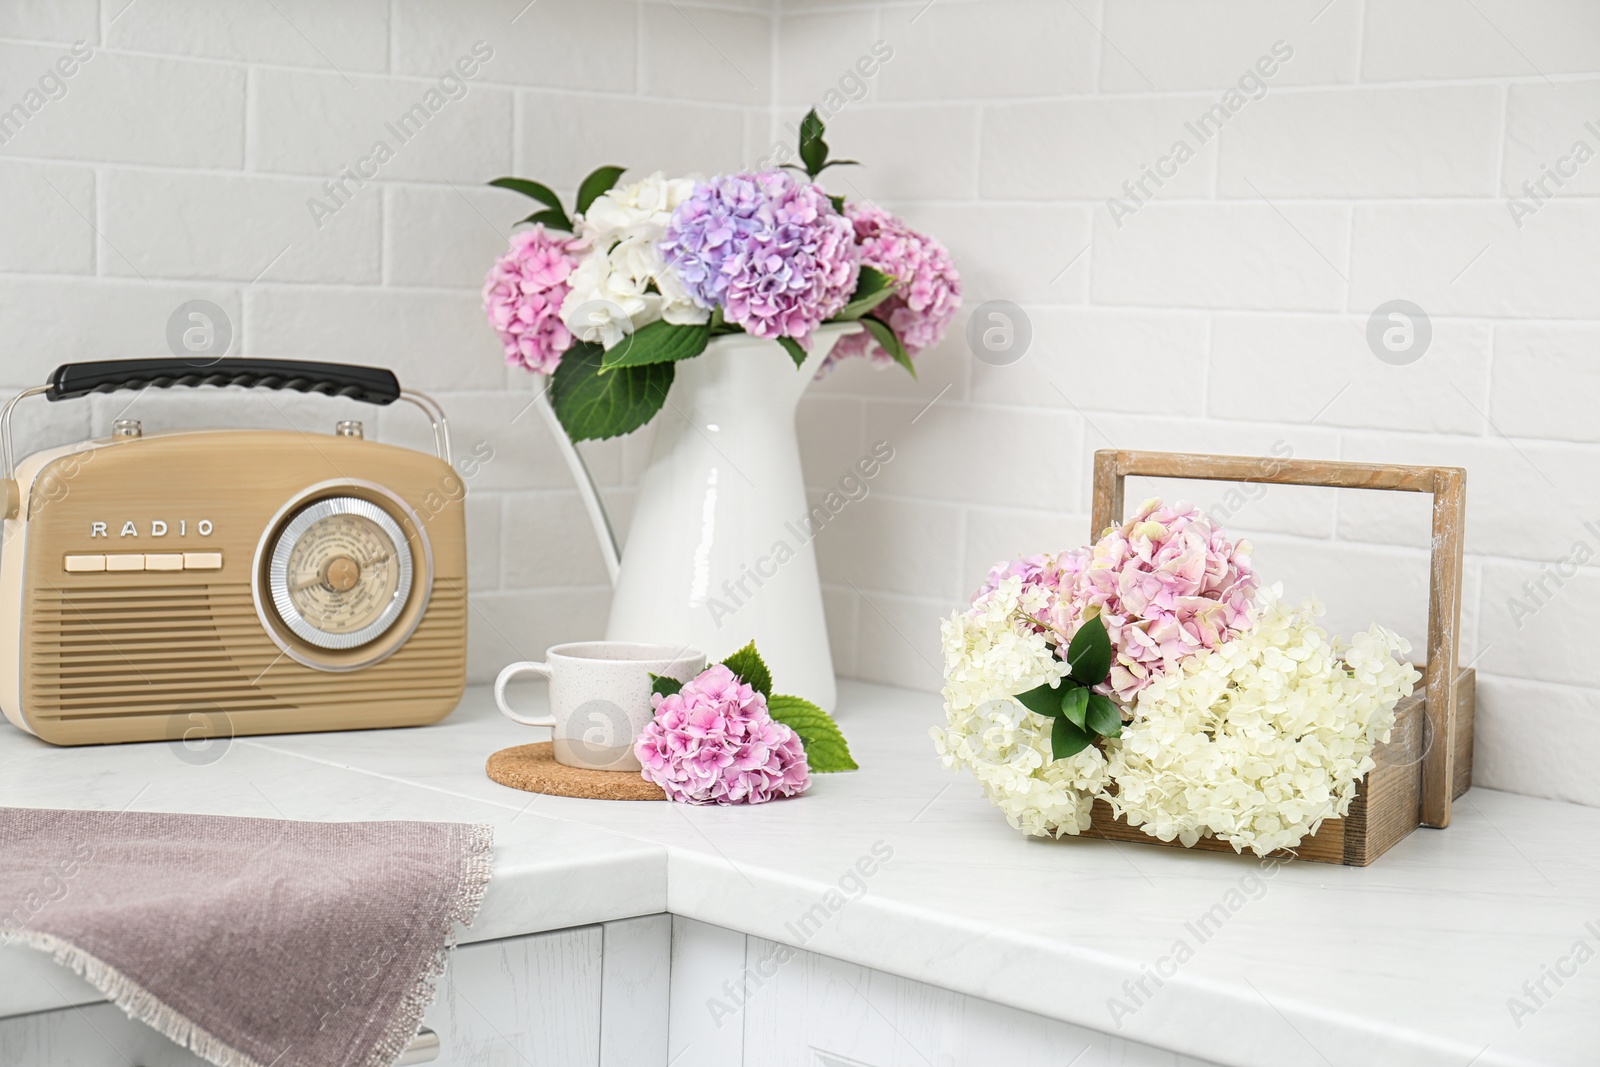 Photo of Beautiful hydrangea flowers, cup and radio set on light countertop